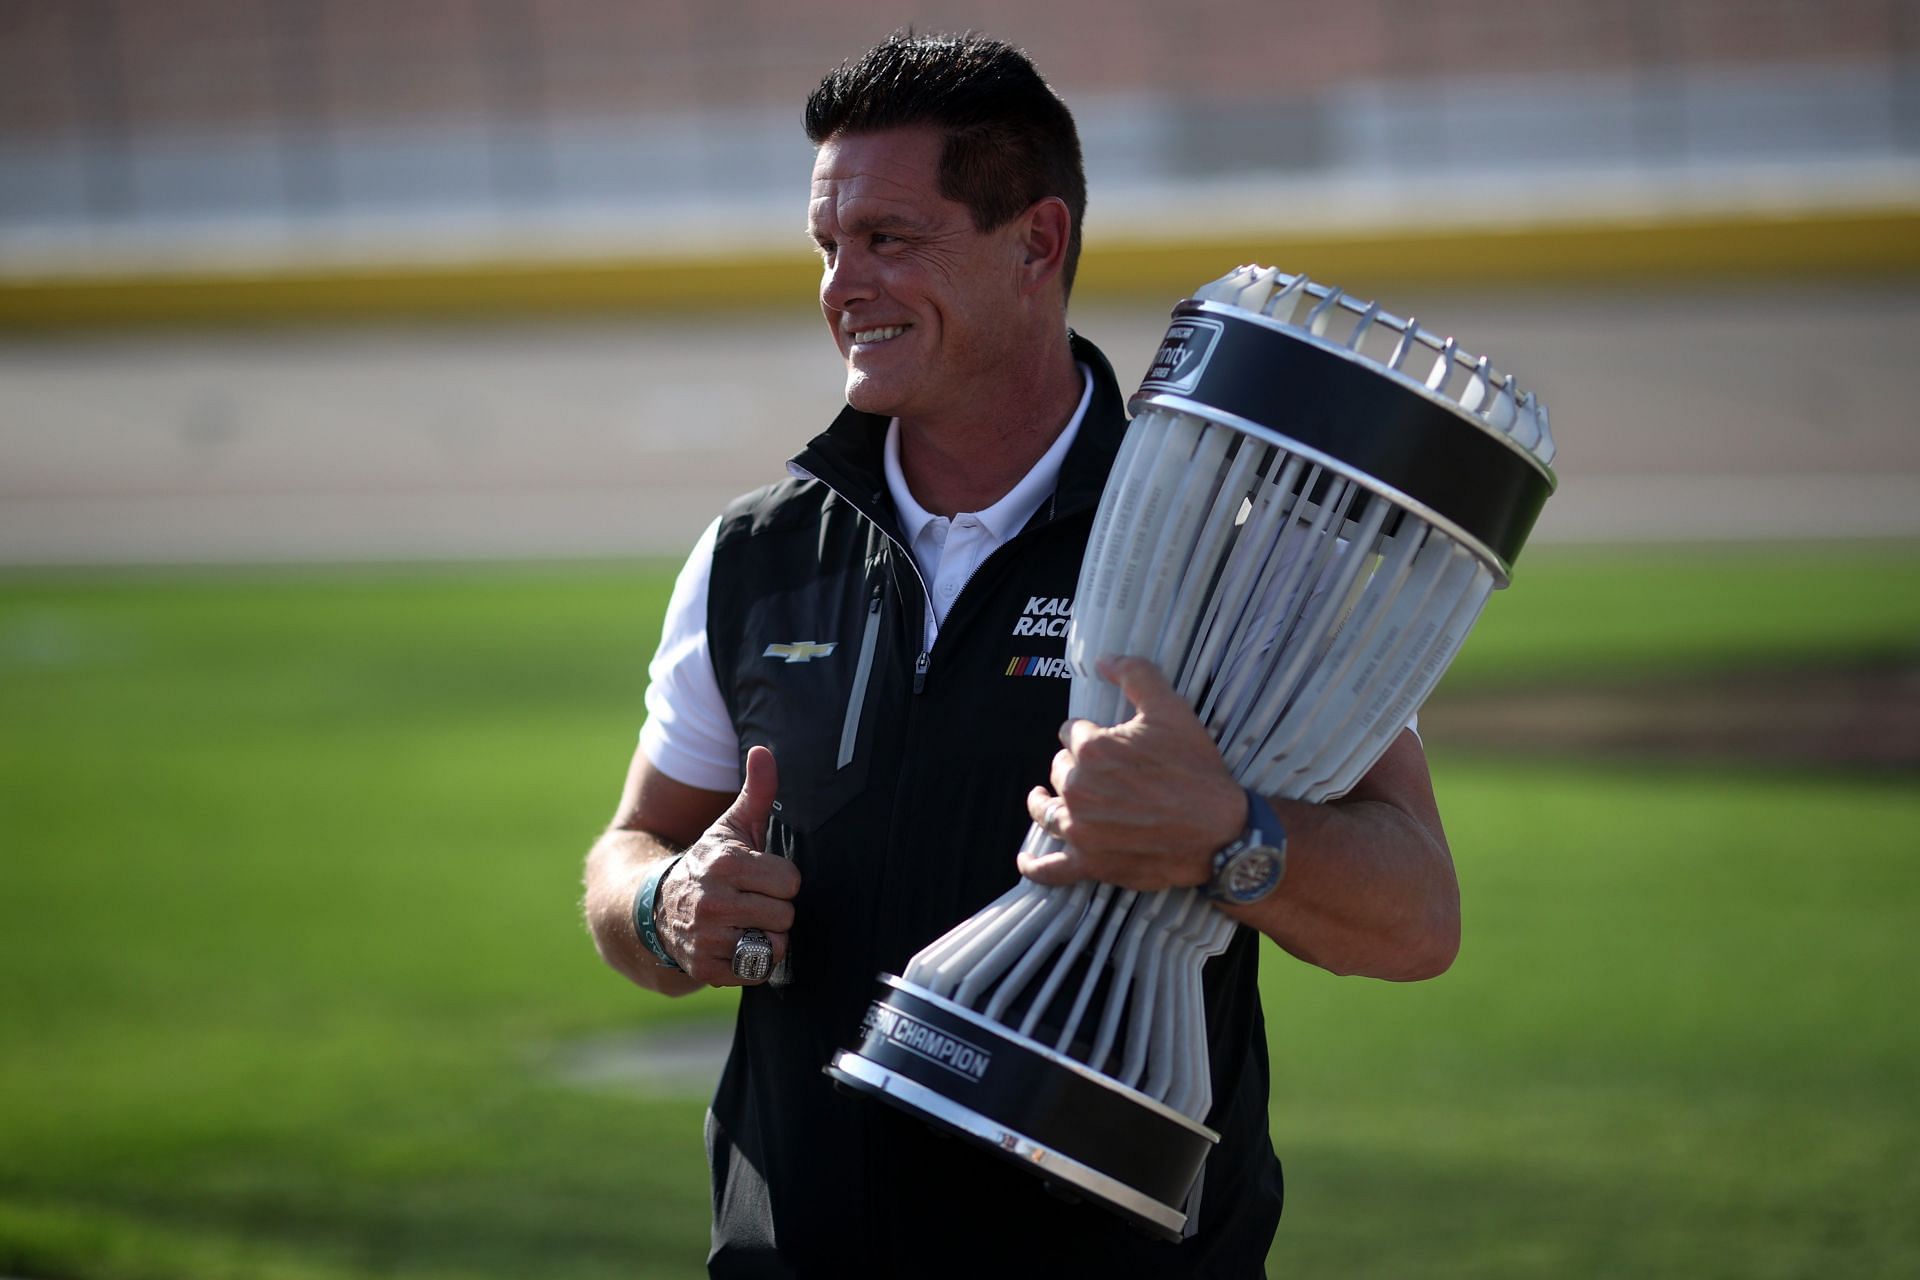 Matt Kaulig poses for photos with the 2021 Xfinity Series Regular Season Championship trophy before the Xfinity Series Alsco Uniforms 302 at Las Vegas Motor Speedway (Photo by Chris Graythen/Getty Images)